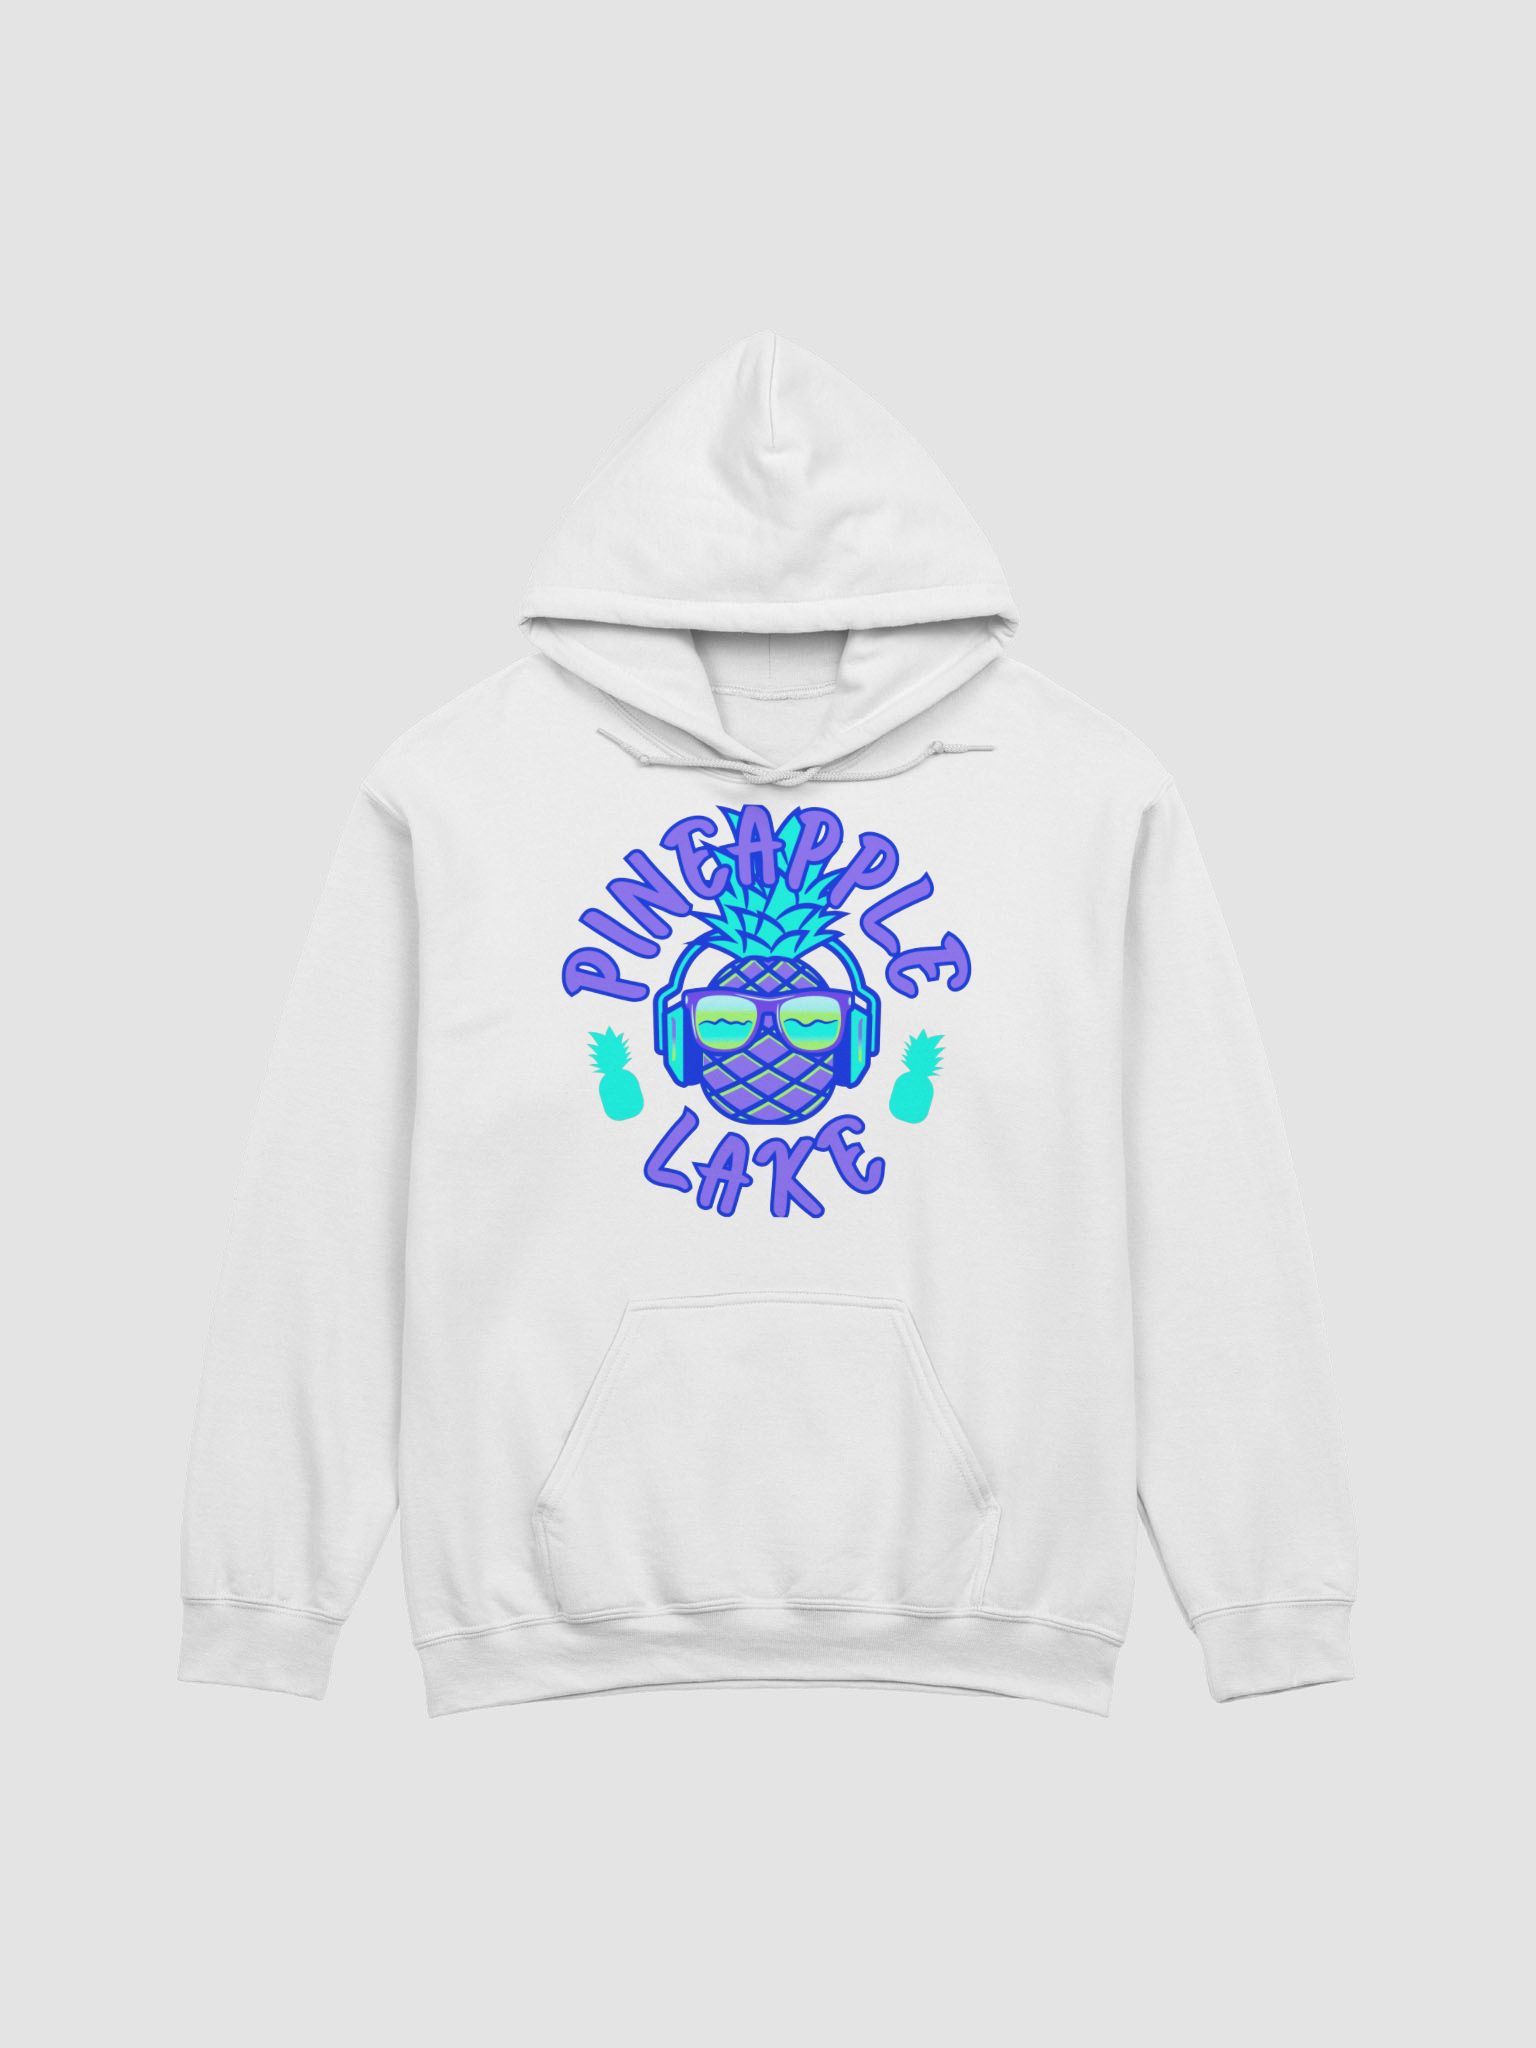 Save Money.Enjoy Life. Graphic Design Hoodies. Streetwear  Tshirts, Custom Apparel for Urbanwear for men, Urbanwear for women and  Urbanwear for kids,Holiday Decor, Best Gifts, Spend less, Anime, Save Money  on Pet